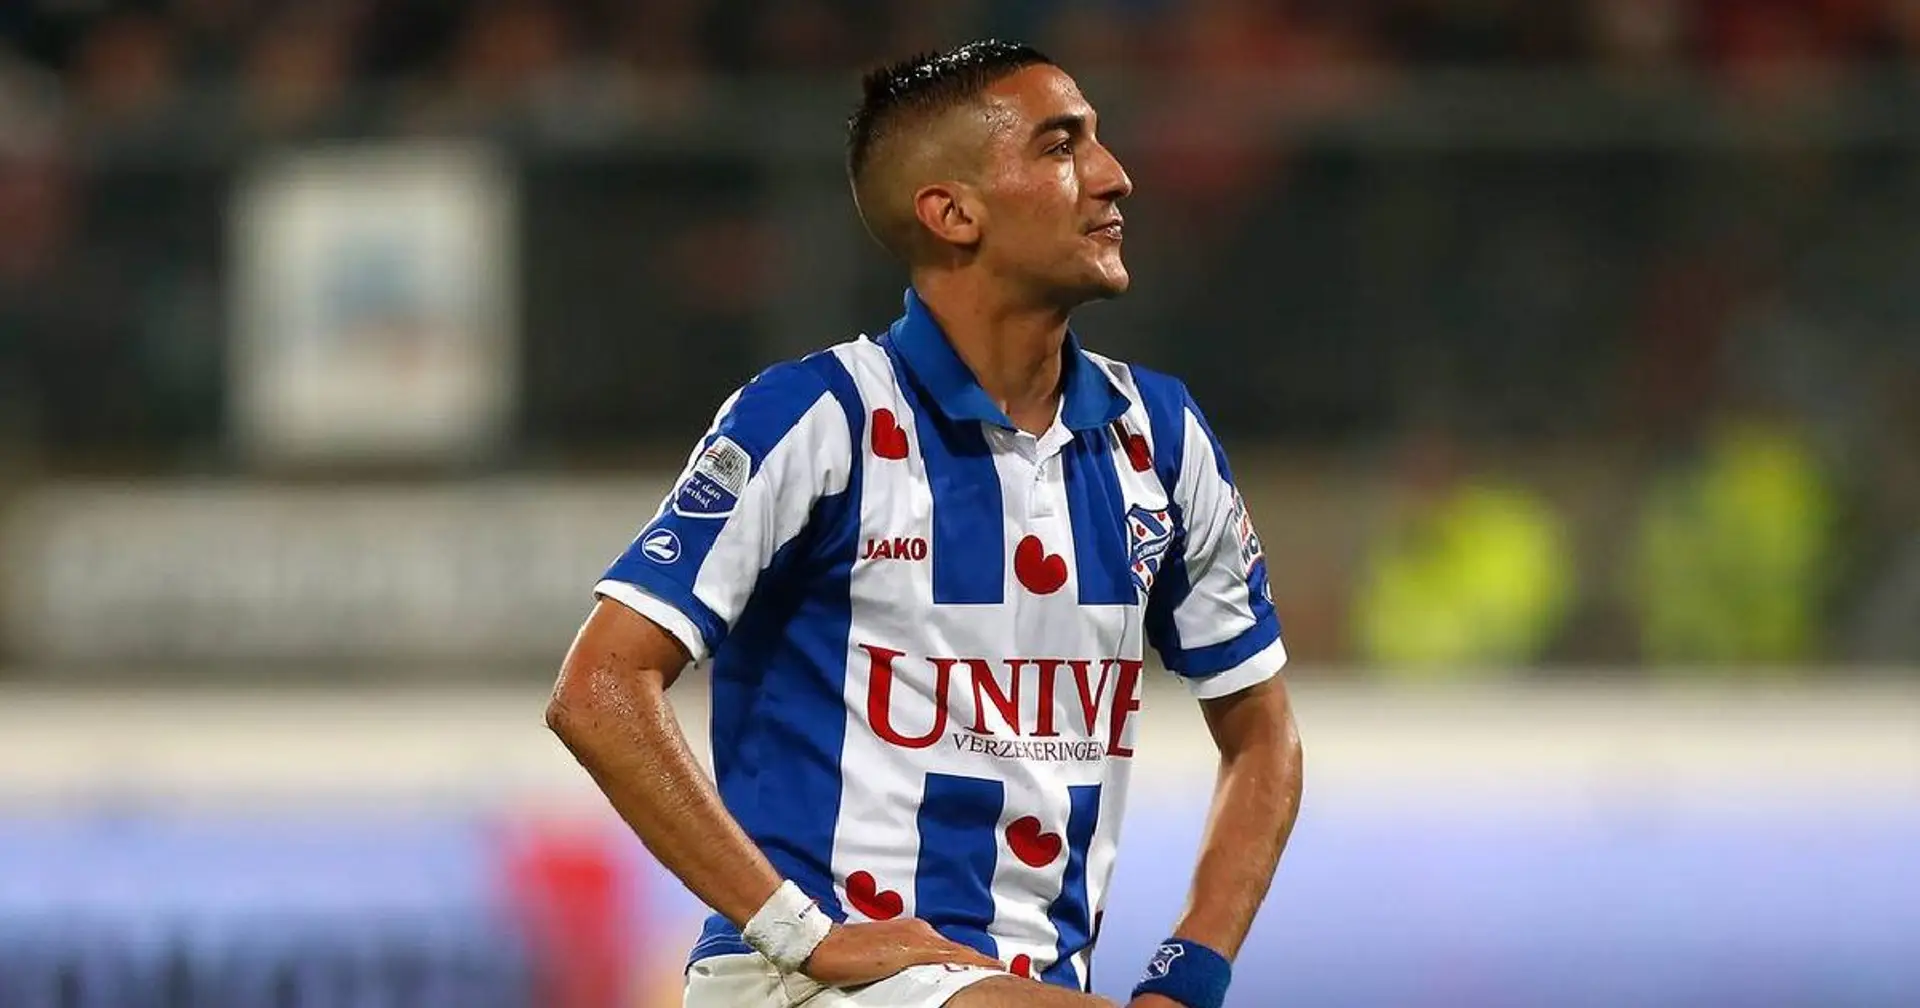 'He became open and told us about his life': Ziyech's former coach details how he helped winger get through difficult stage of career